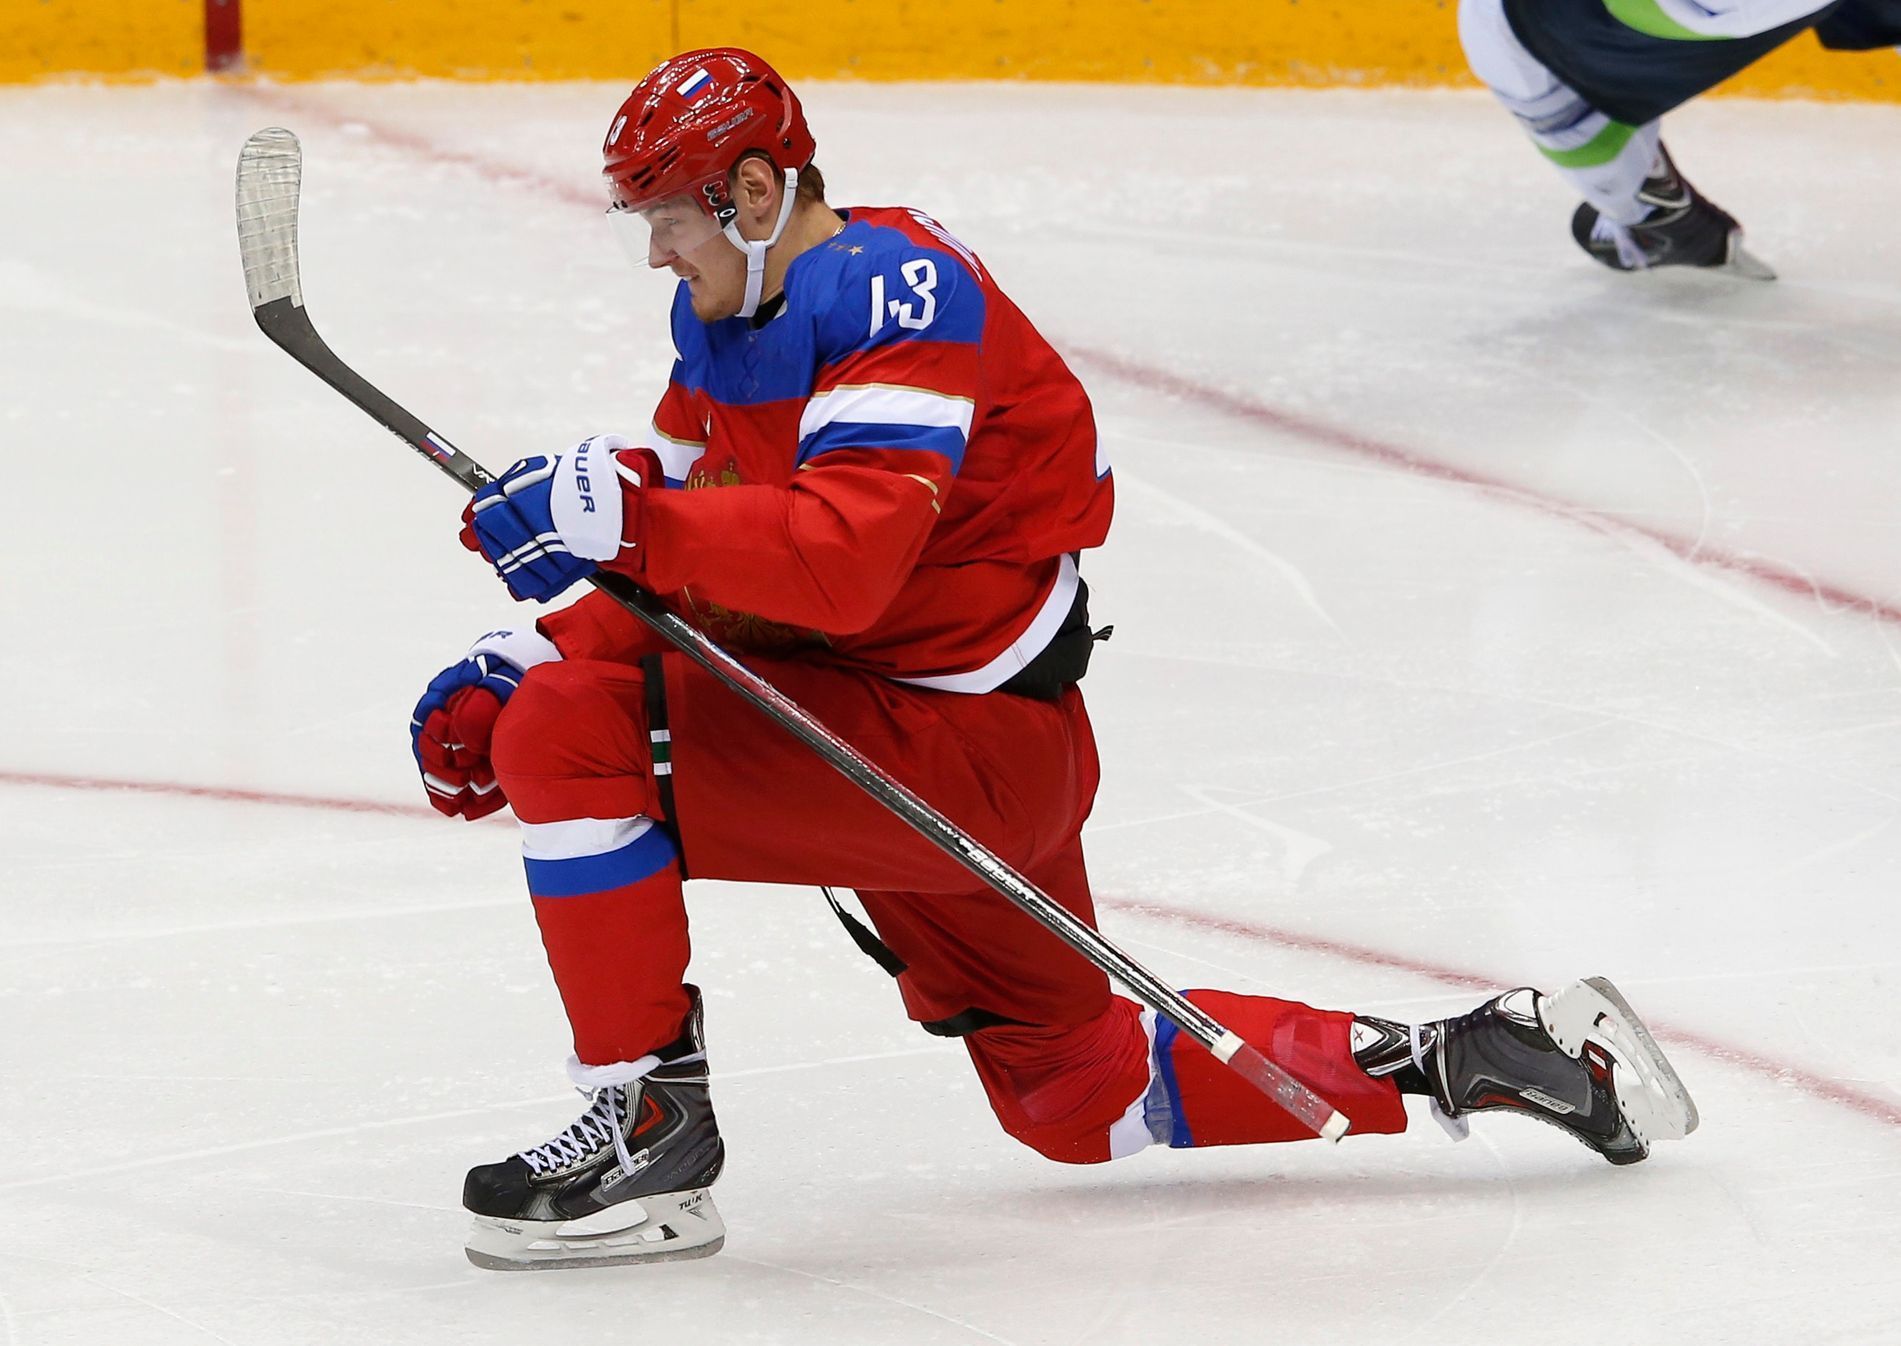 Russia's Valeri Nichushkin celebrates after scoring during the third period of their men's preliminary round ice hockey game against Slovenia at the Sochi 2014 Winter Olympic Games